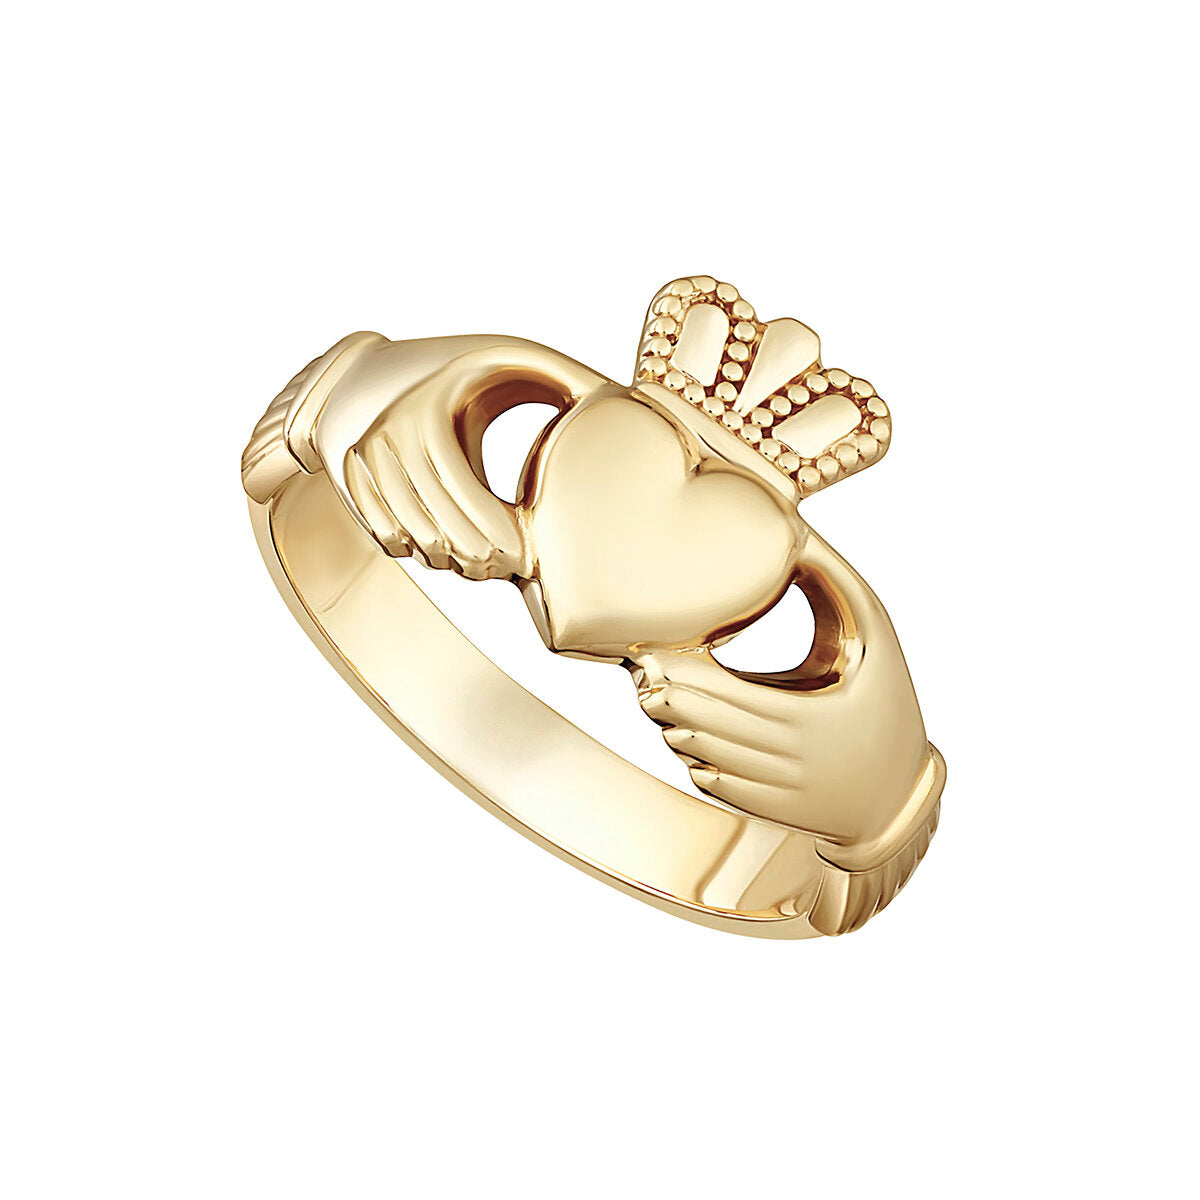 Claddagh ring | History, Design, & Facts | Britannica